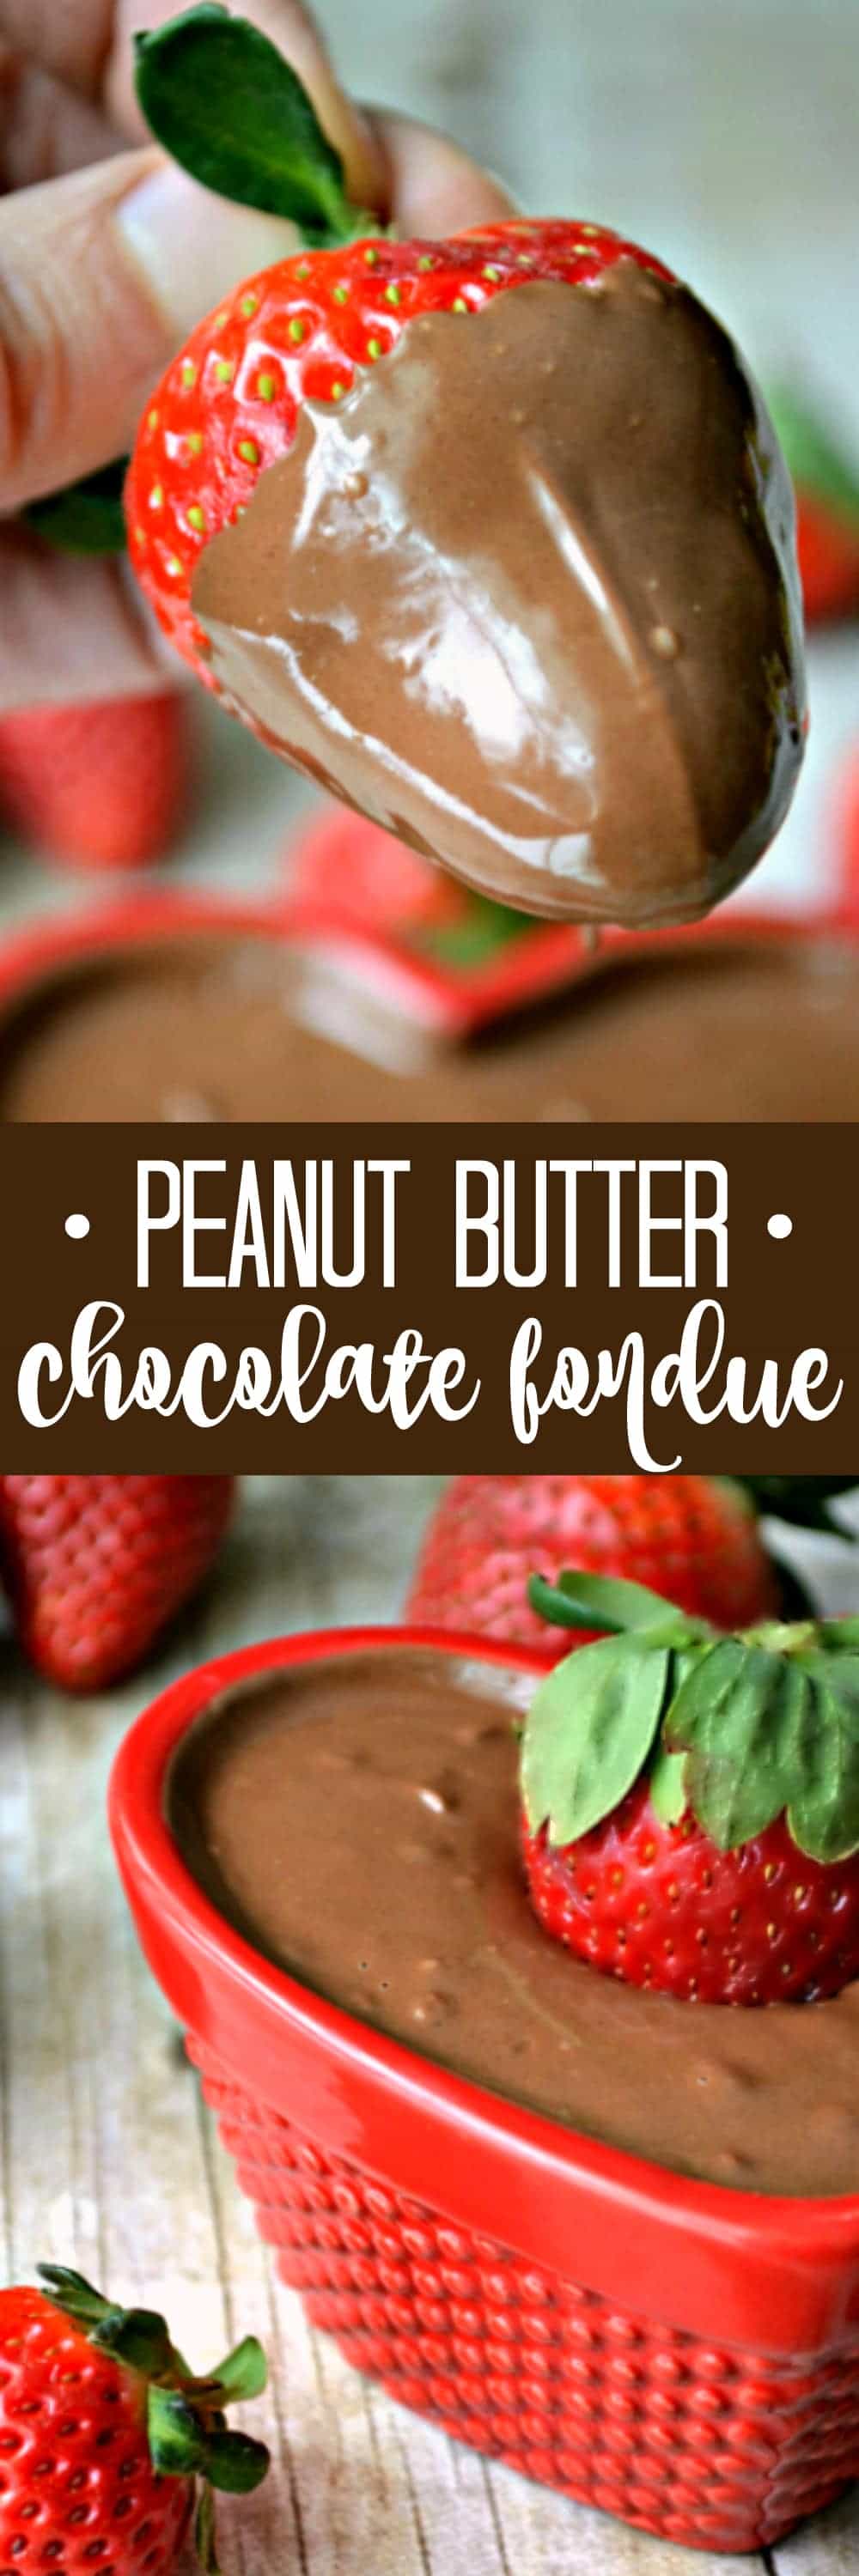 Reach, creamy Peanut Butter Chocolate Fondue...made with just 3 simple ingredients and ready in no time at all!